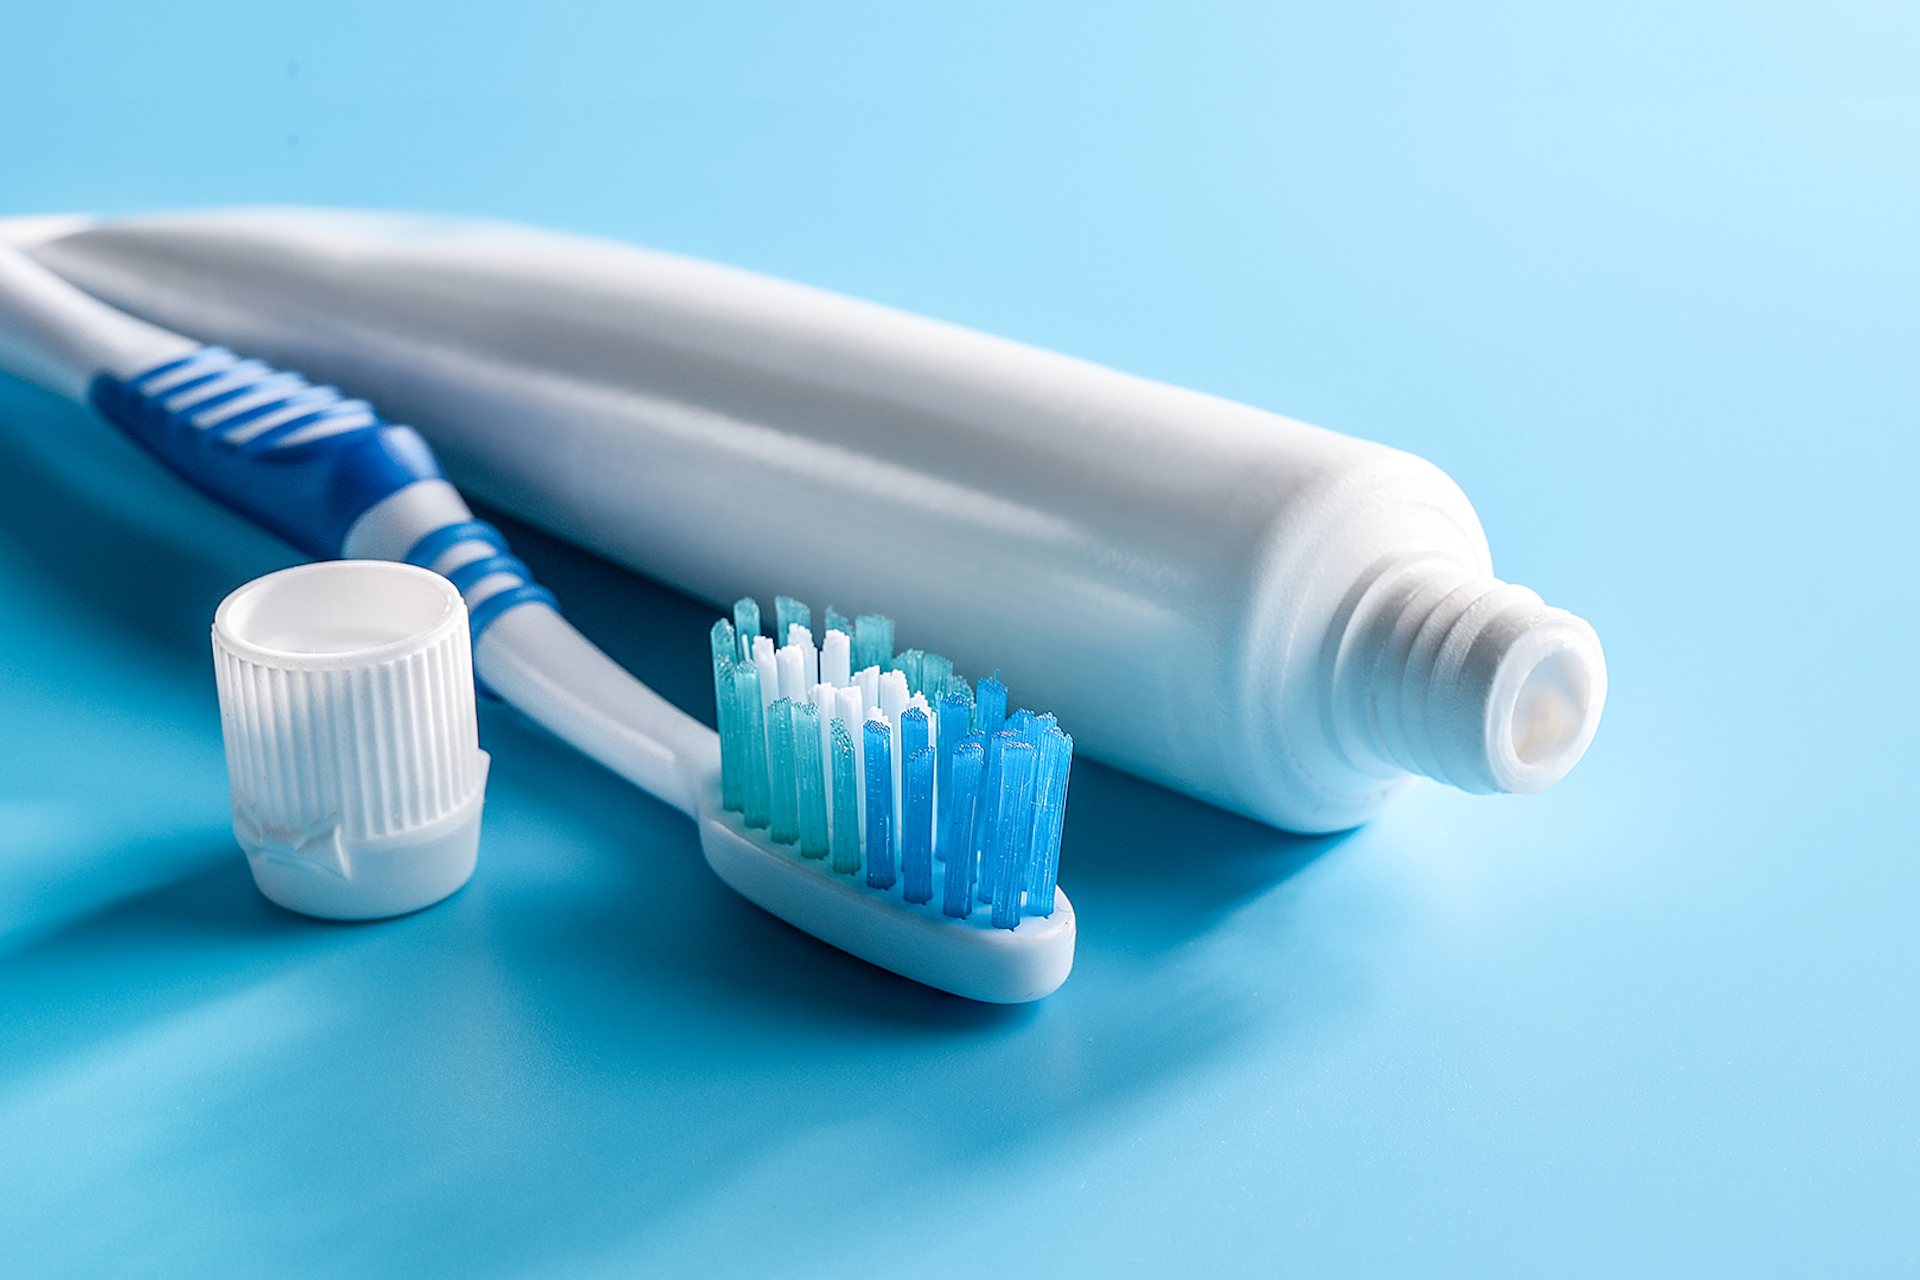 An image of a toothbrush and an open toothpaste on blue background